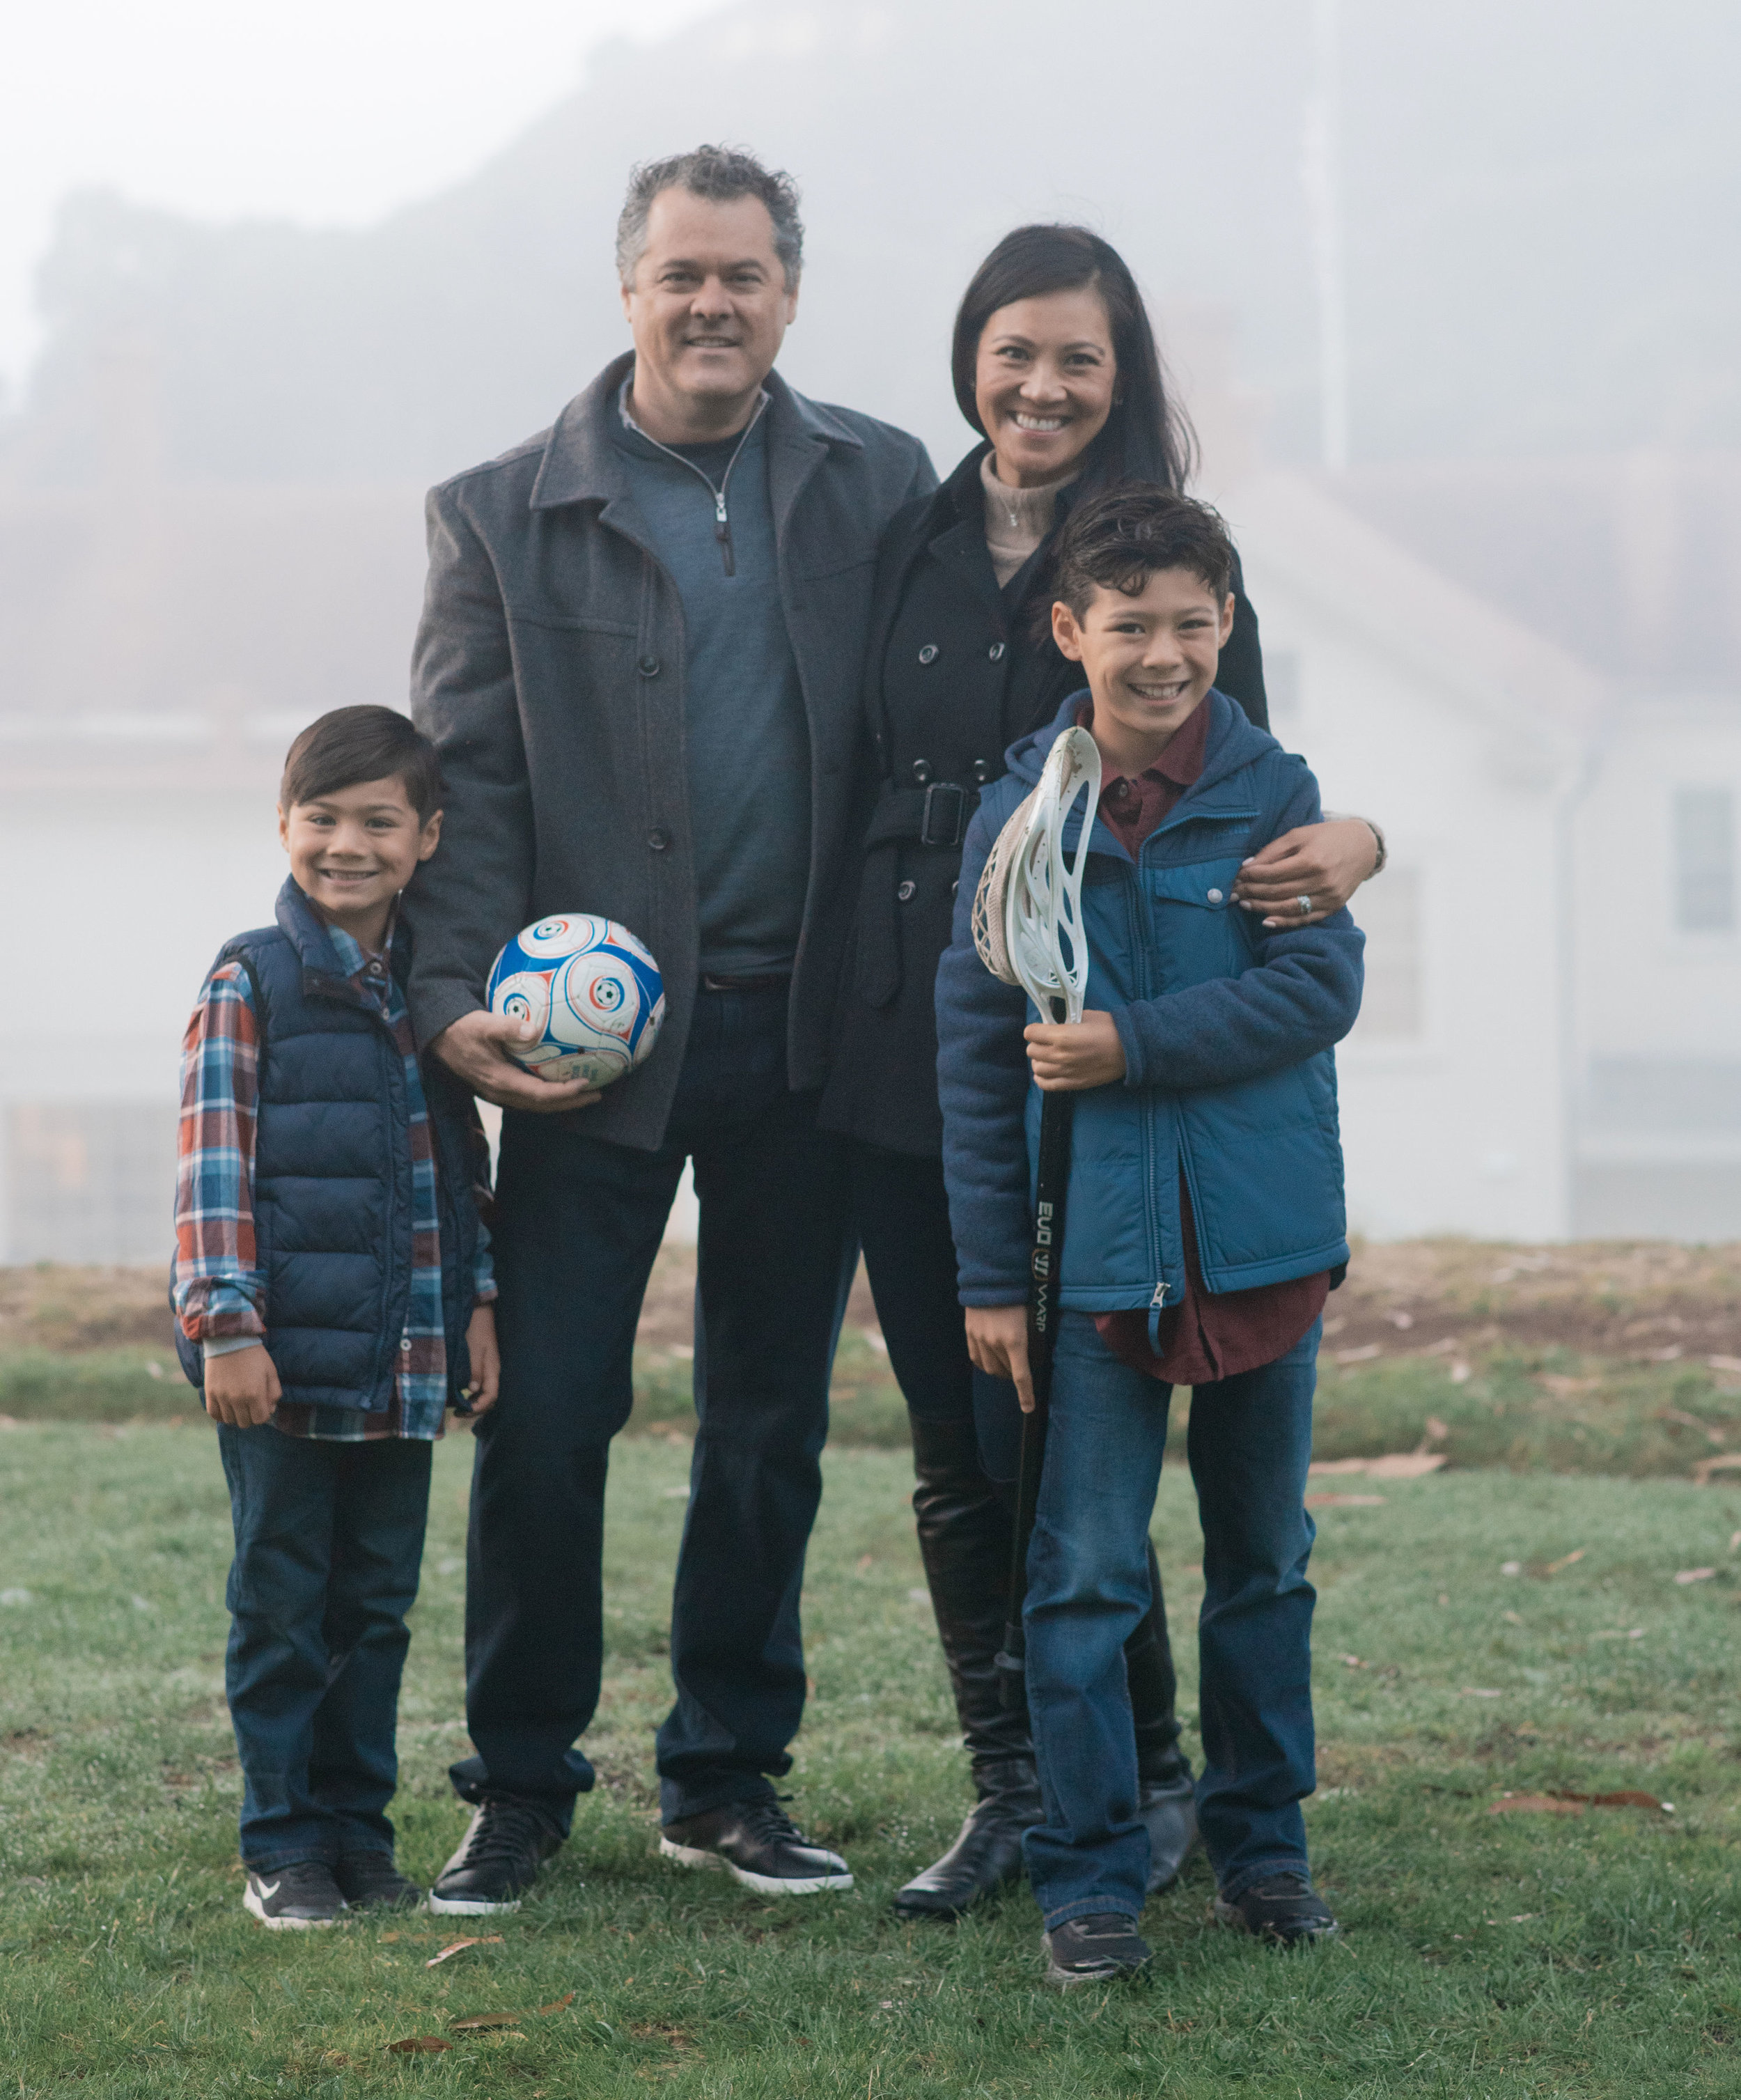  Nothing shouts fall fashion like pea coats, vests, and riding boots! This family absolutely nailed it with their layering, color scheme, and accessories. Adding in the athletic equipment (soccer ball and lacrosse stick) also help preserve the boys’ interests at this age and give another accent to the photo! 